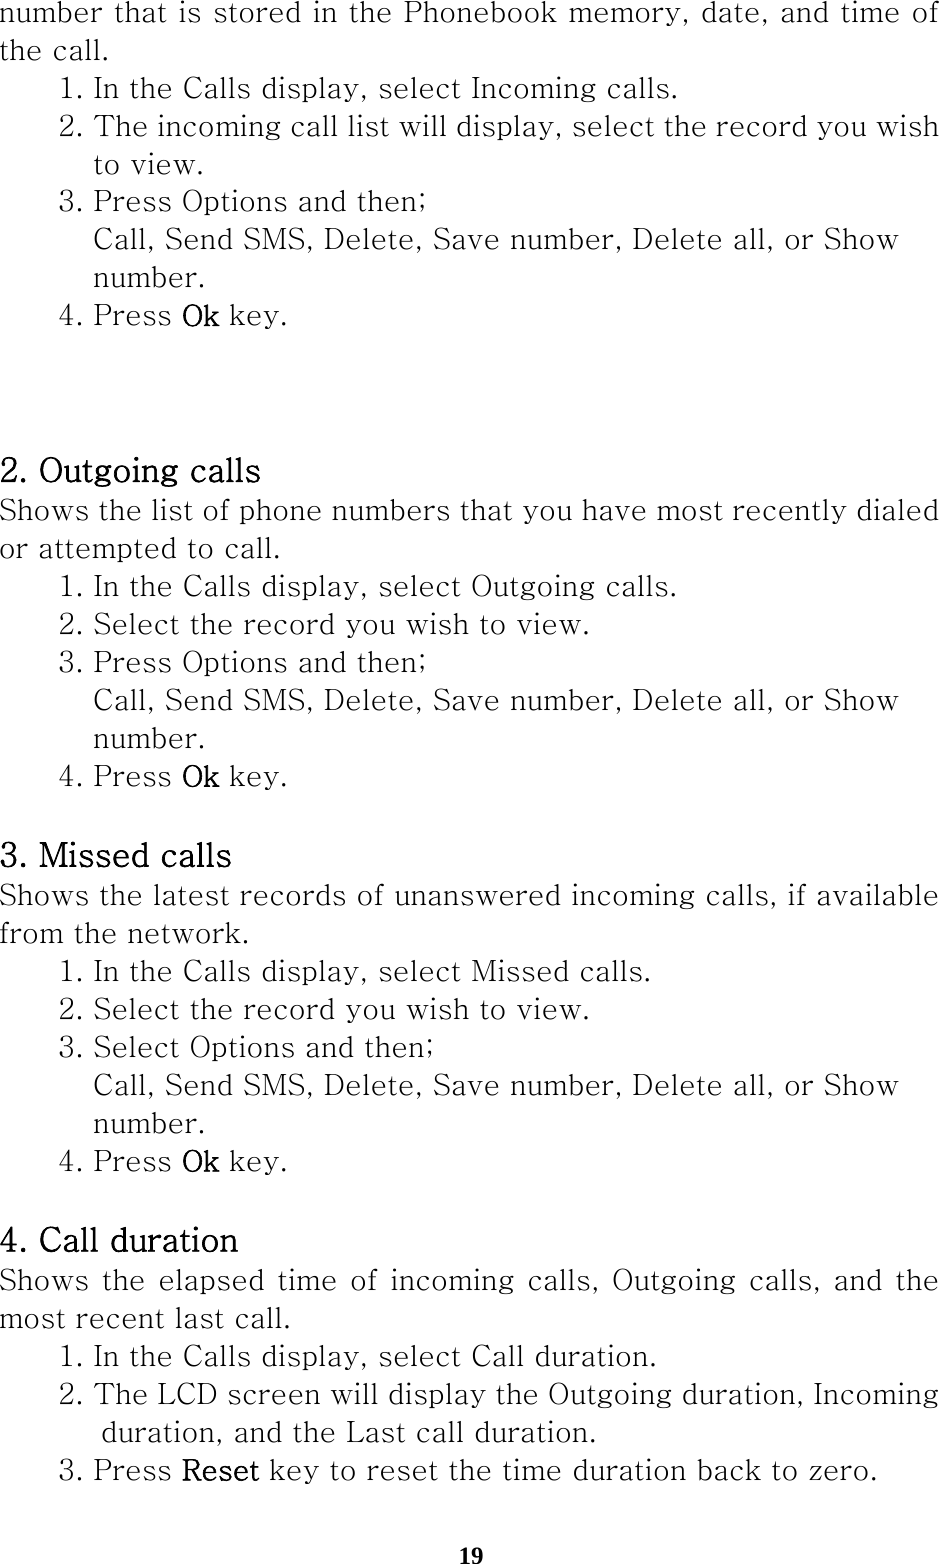  19number that is stored in the Phonebook memory, date, and time of the call.   1. In the Calls display, select Incoming calls.   2. The incoming call list will display, select the record you wish       to view.   3. Press Options and then;       Call, Send SMS, Delete, Save number, Delete all, or Show      number.   4. Press Ok key.    2. Outgoing calls Shows the list of phone numbers that you have most recently dialed or attempted to call.     1. In the Calls display, select Outgoing calls.     2. Select the record you wish to view.     3. Press Options and then;       Call, Send SMS, Delete, Save number, Delete all, or Show     number.    4. Press Ok key.  3. Missed calls Shows the latest records of unanswered incoming calls, if available from the network.     1. In the Calls display, select Missed calls.   2. Select the record you wish to view.     3. Select Options and then;       Call, Send SMS, Delete, Save number, Delete all, or Show     number.    4. Press Ok key.  4. Call duration Shows the elapsed time of incoming calls, Outgoing calls, and the most recent last call.   1. In the Calls display, select Call duration.   2. The LCD screen will display the Outgoing duration, Incoming duration, and the Last call duration.   3. Press Reset key to reset the time duration back to zero. 